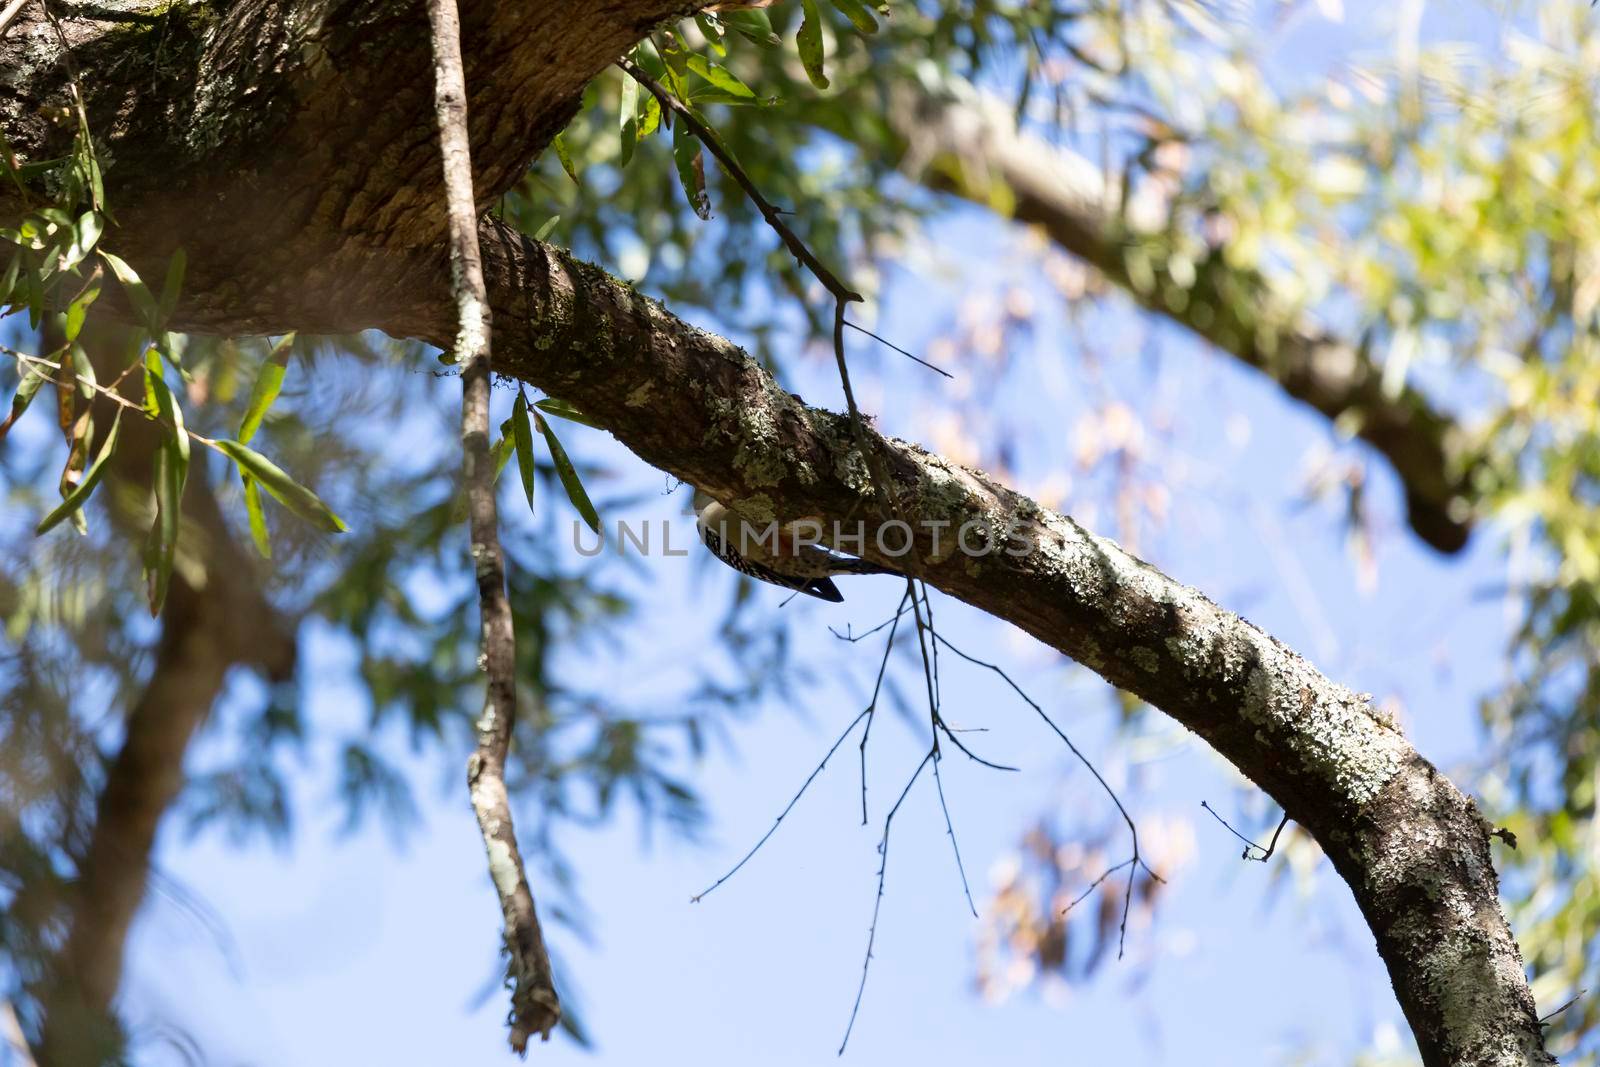 Red-bellied woodpecker (Melanerpes carolinus) hanging from the bottom of a tree limb and foraging